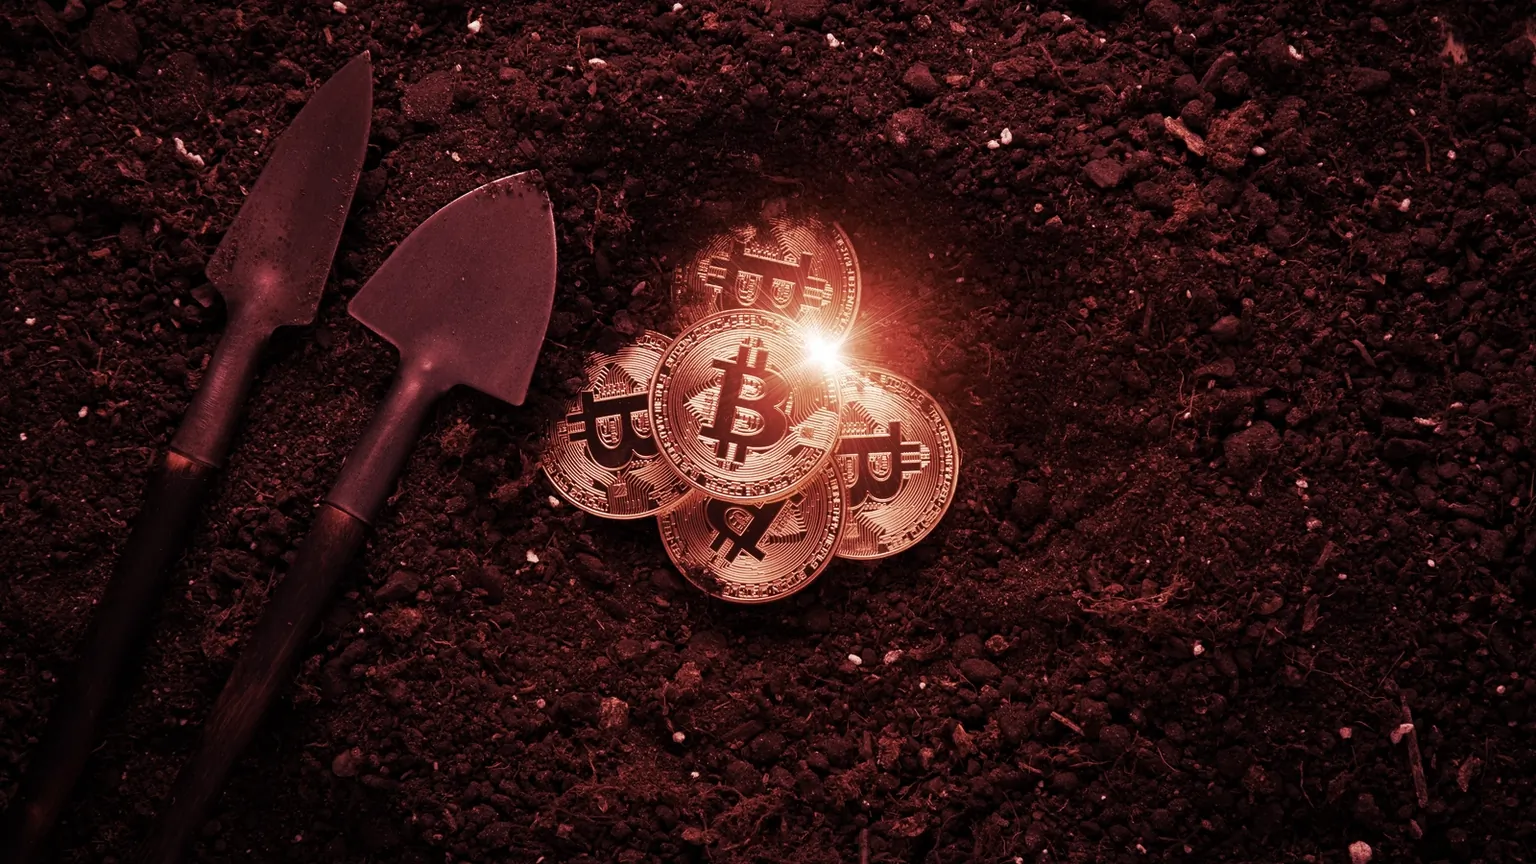 Finding Bitcoin in the ground. Image: Shutterstock